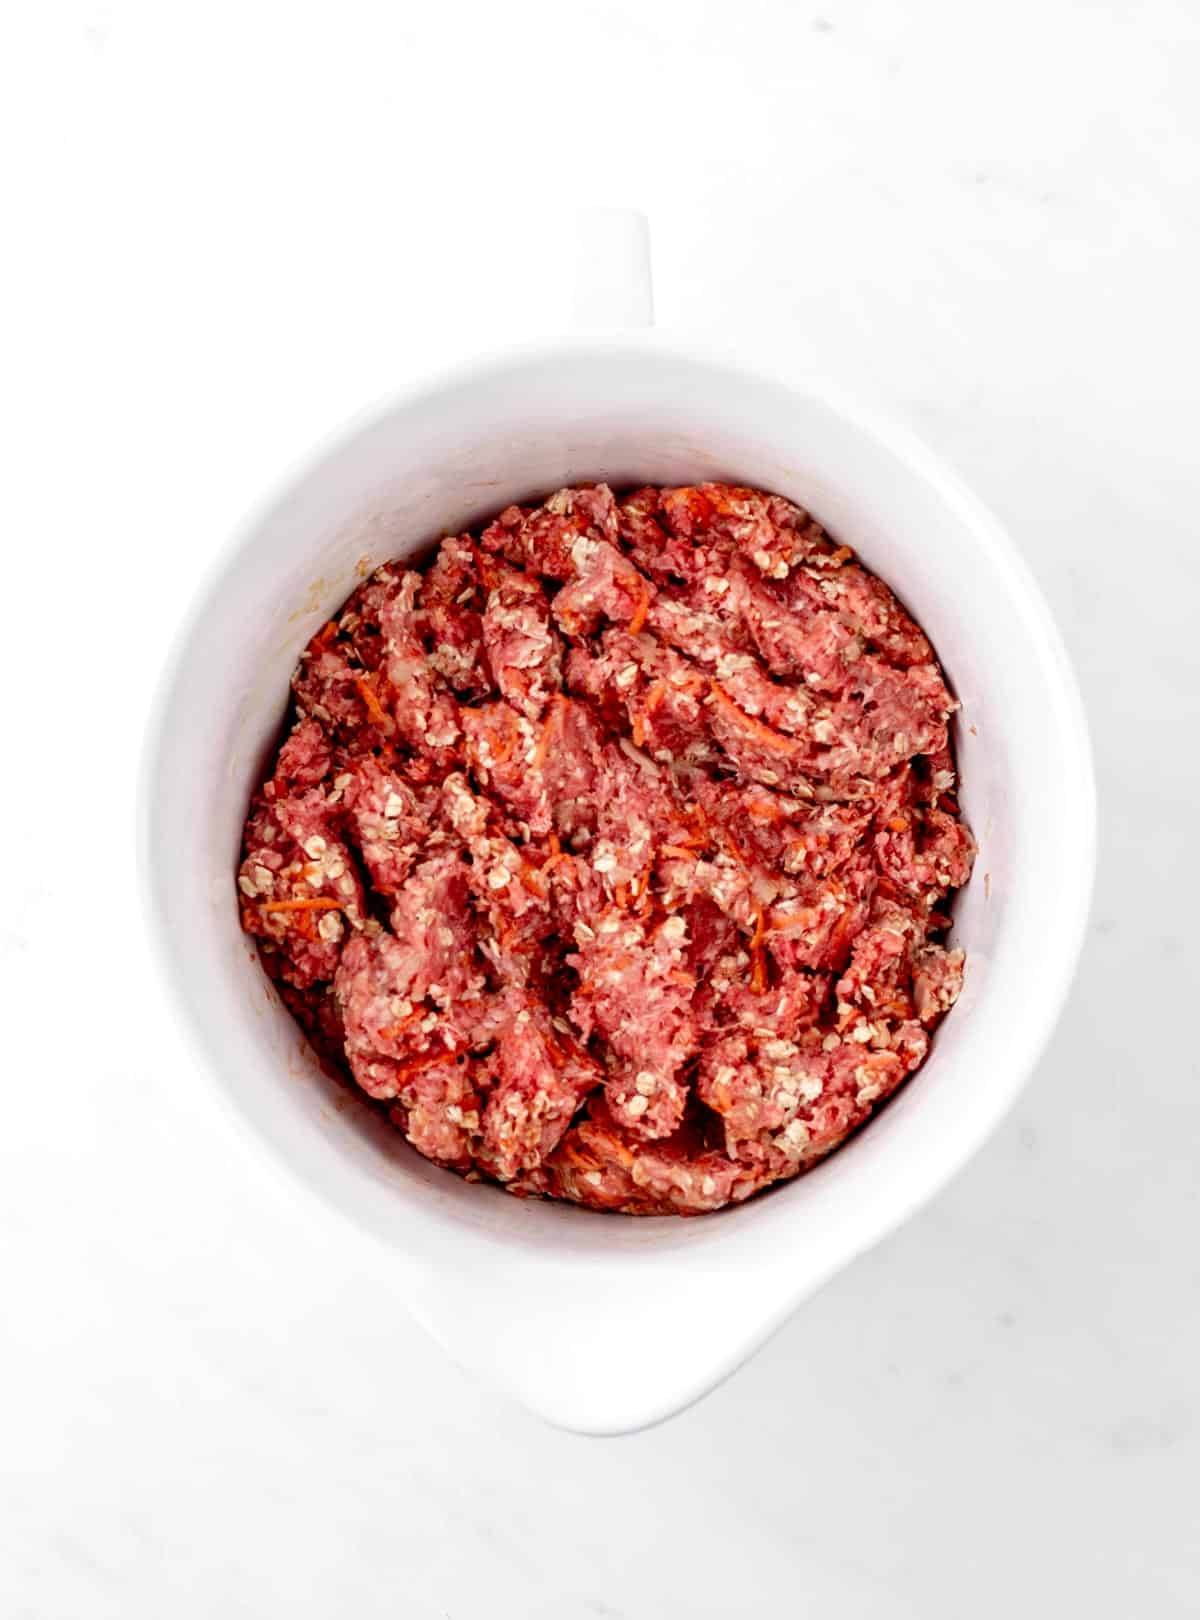 Meatloaf mixture in a bowl combined and ready to make healthy meatloaf recipe with oats.